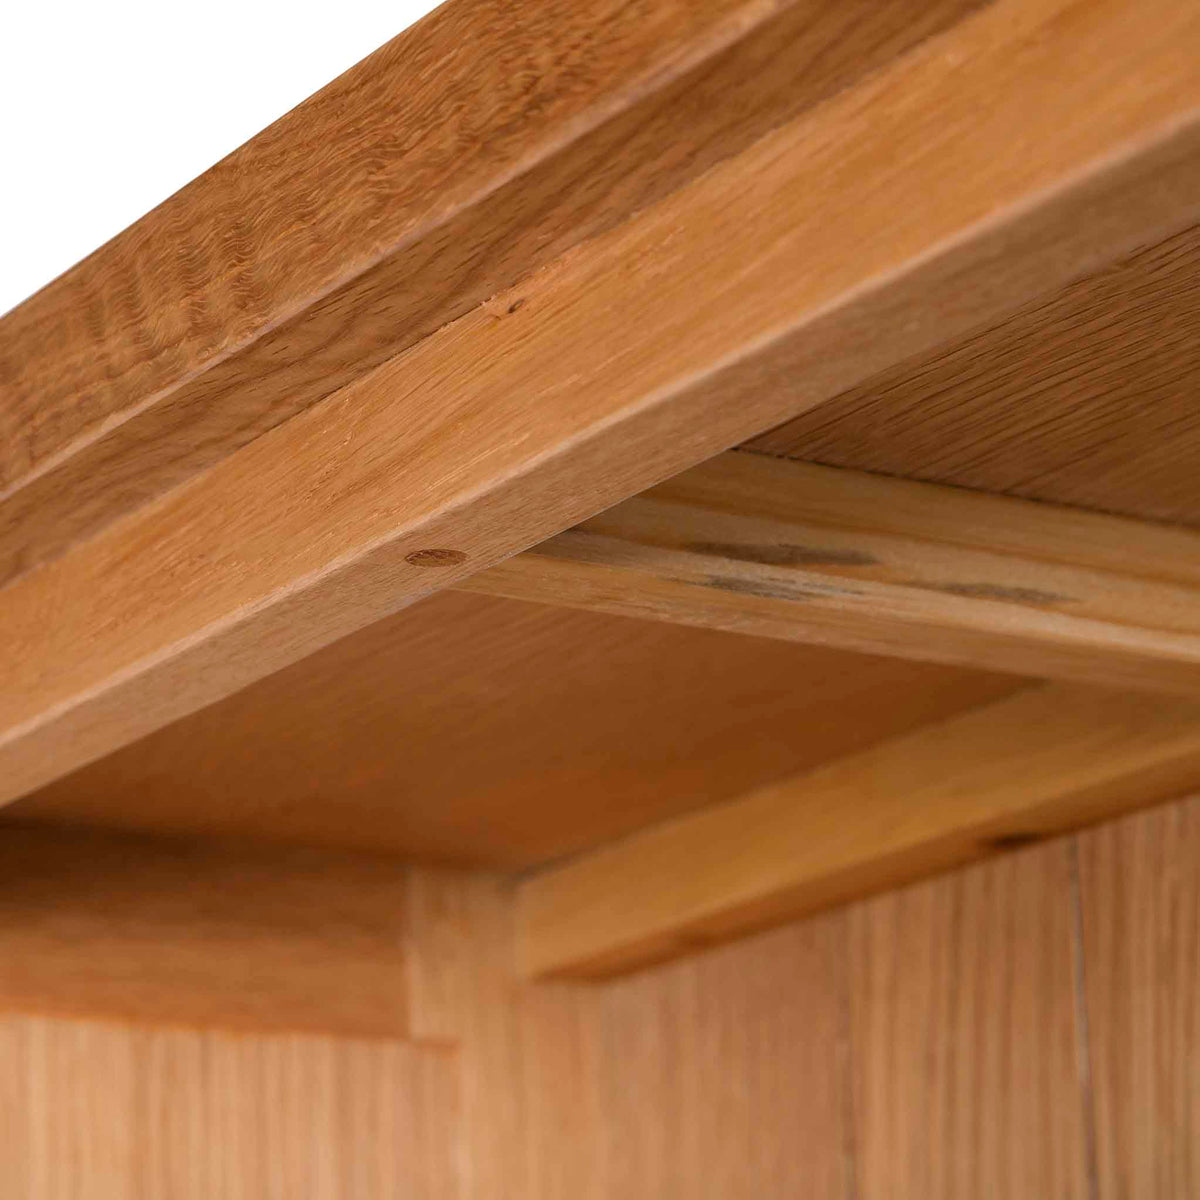 London Oak Large Bookcase - Close up of inside/underneath top of bookcase